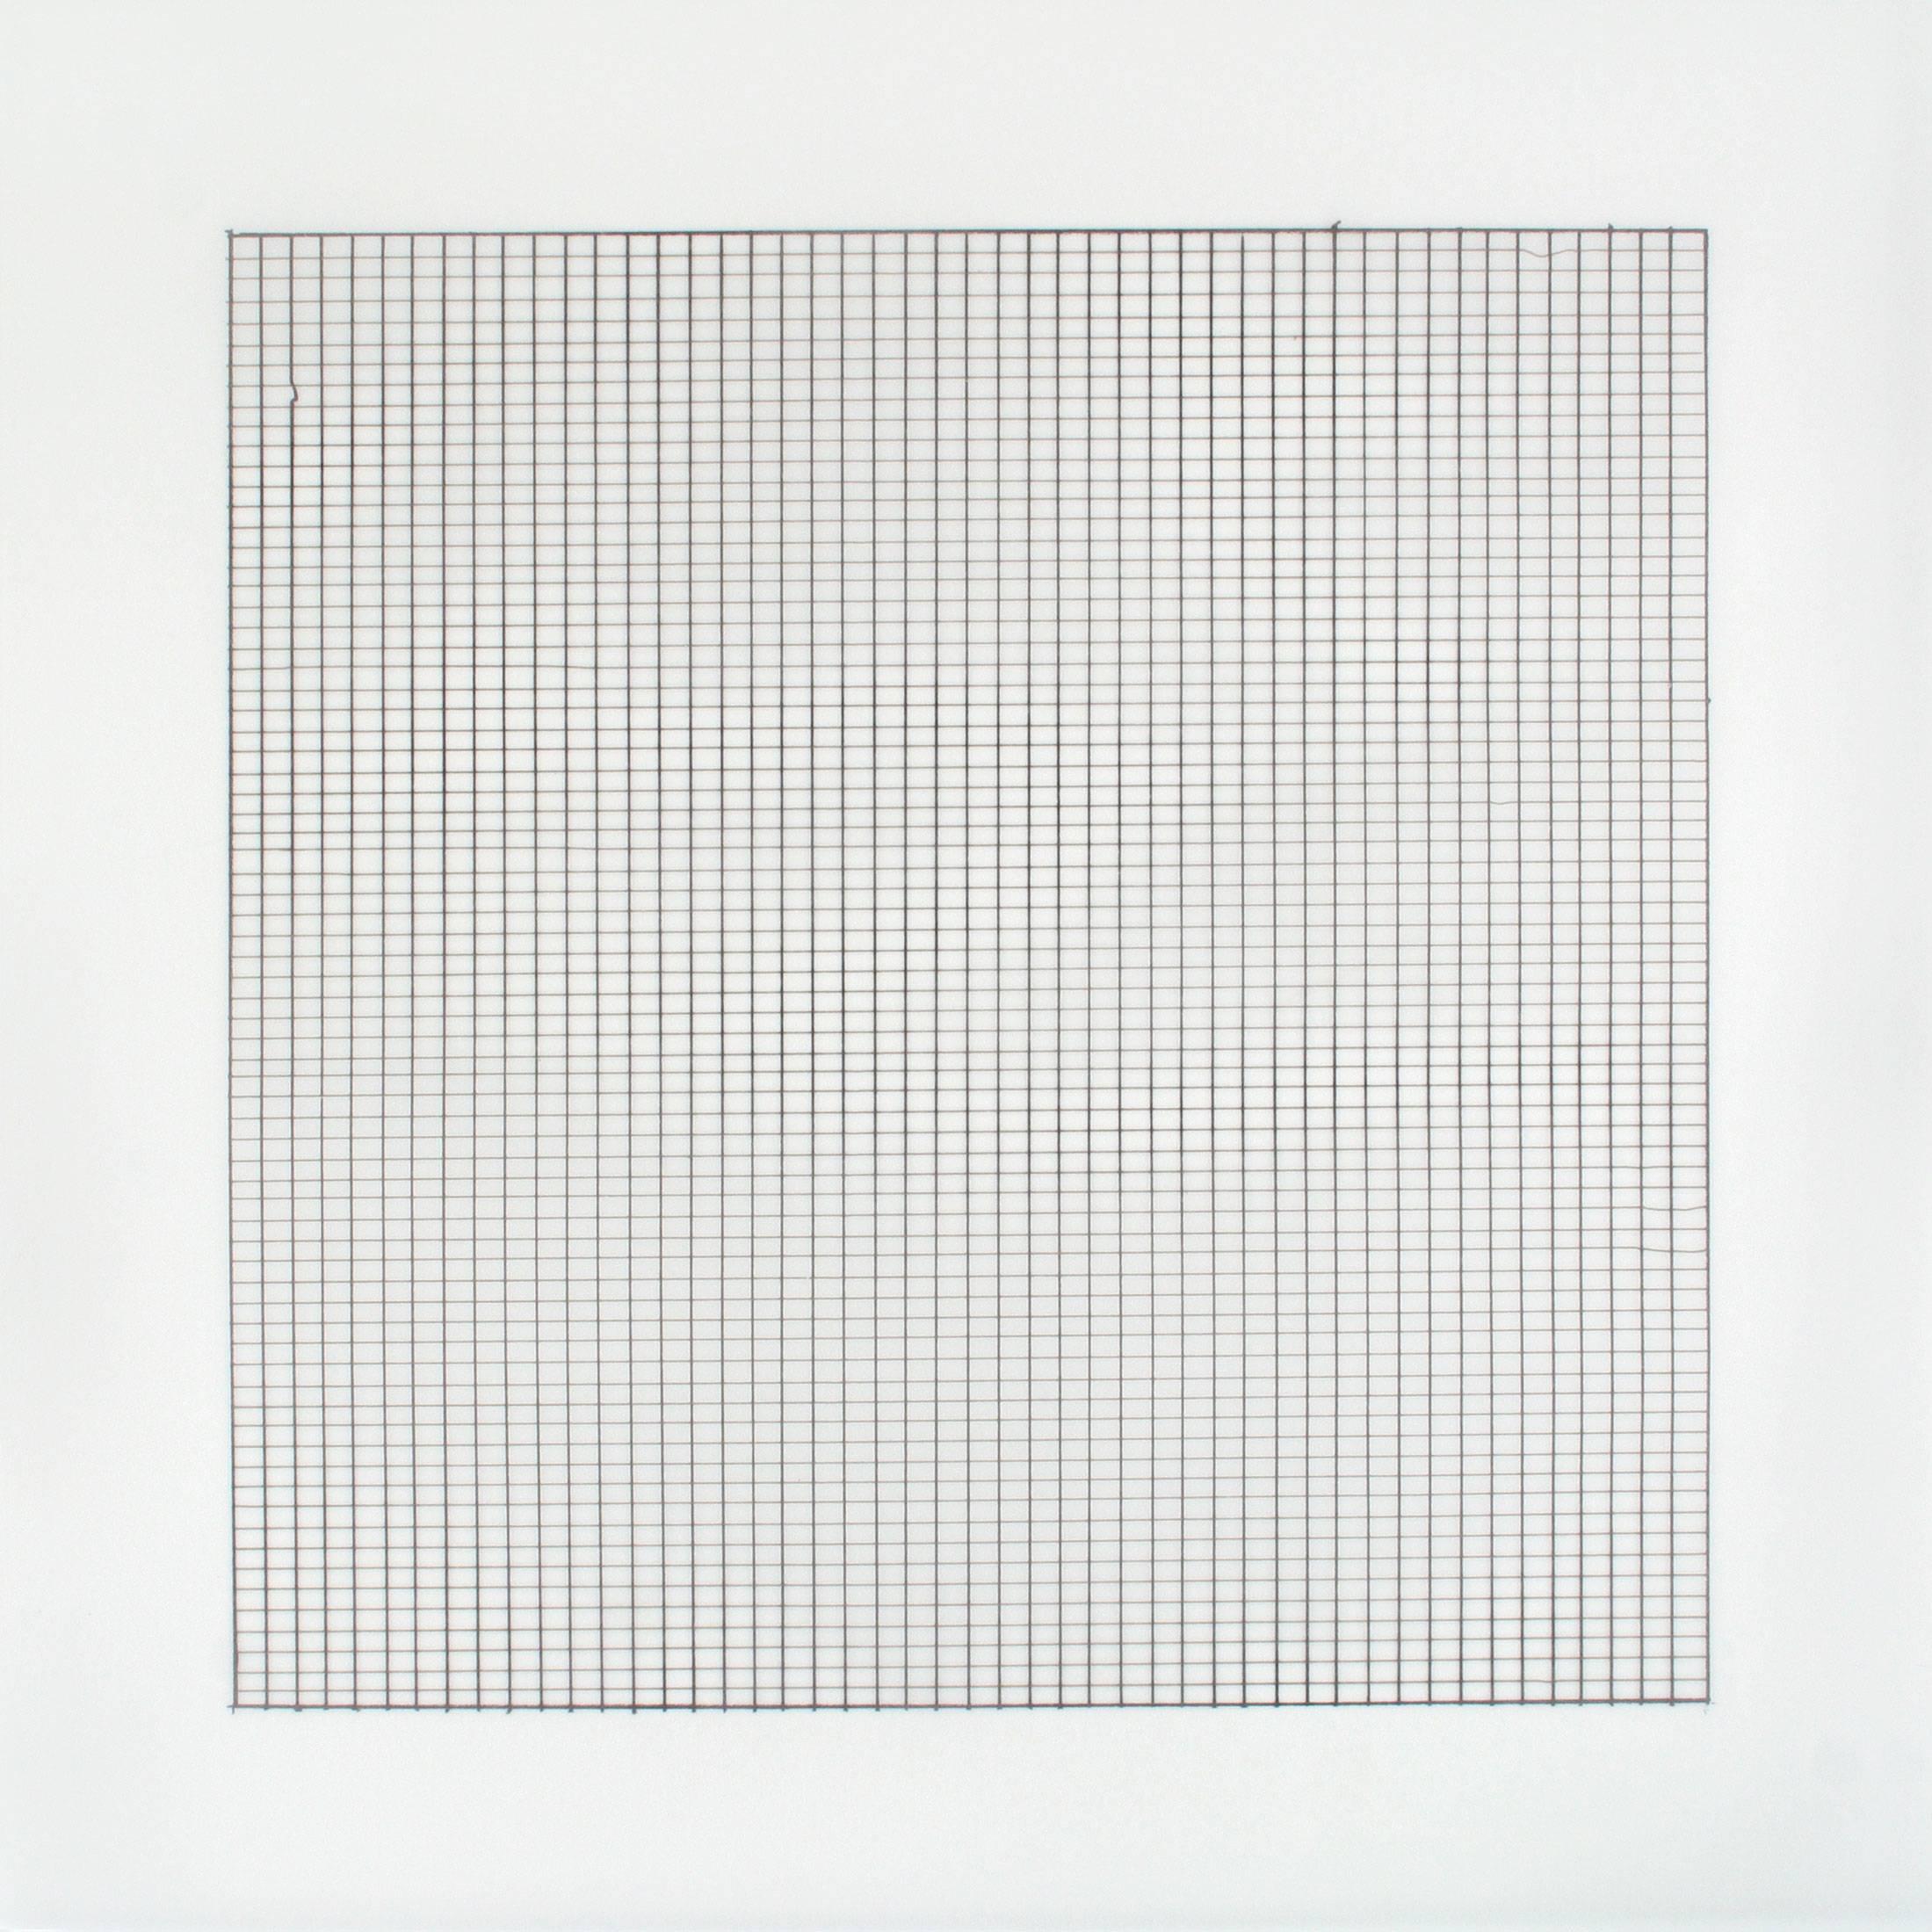 AGNES MARTIN. Paintings and Drawings 1974-1990 6